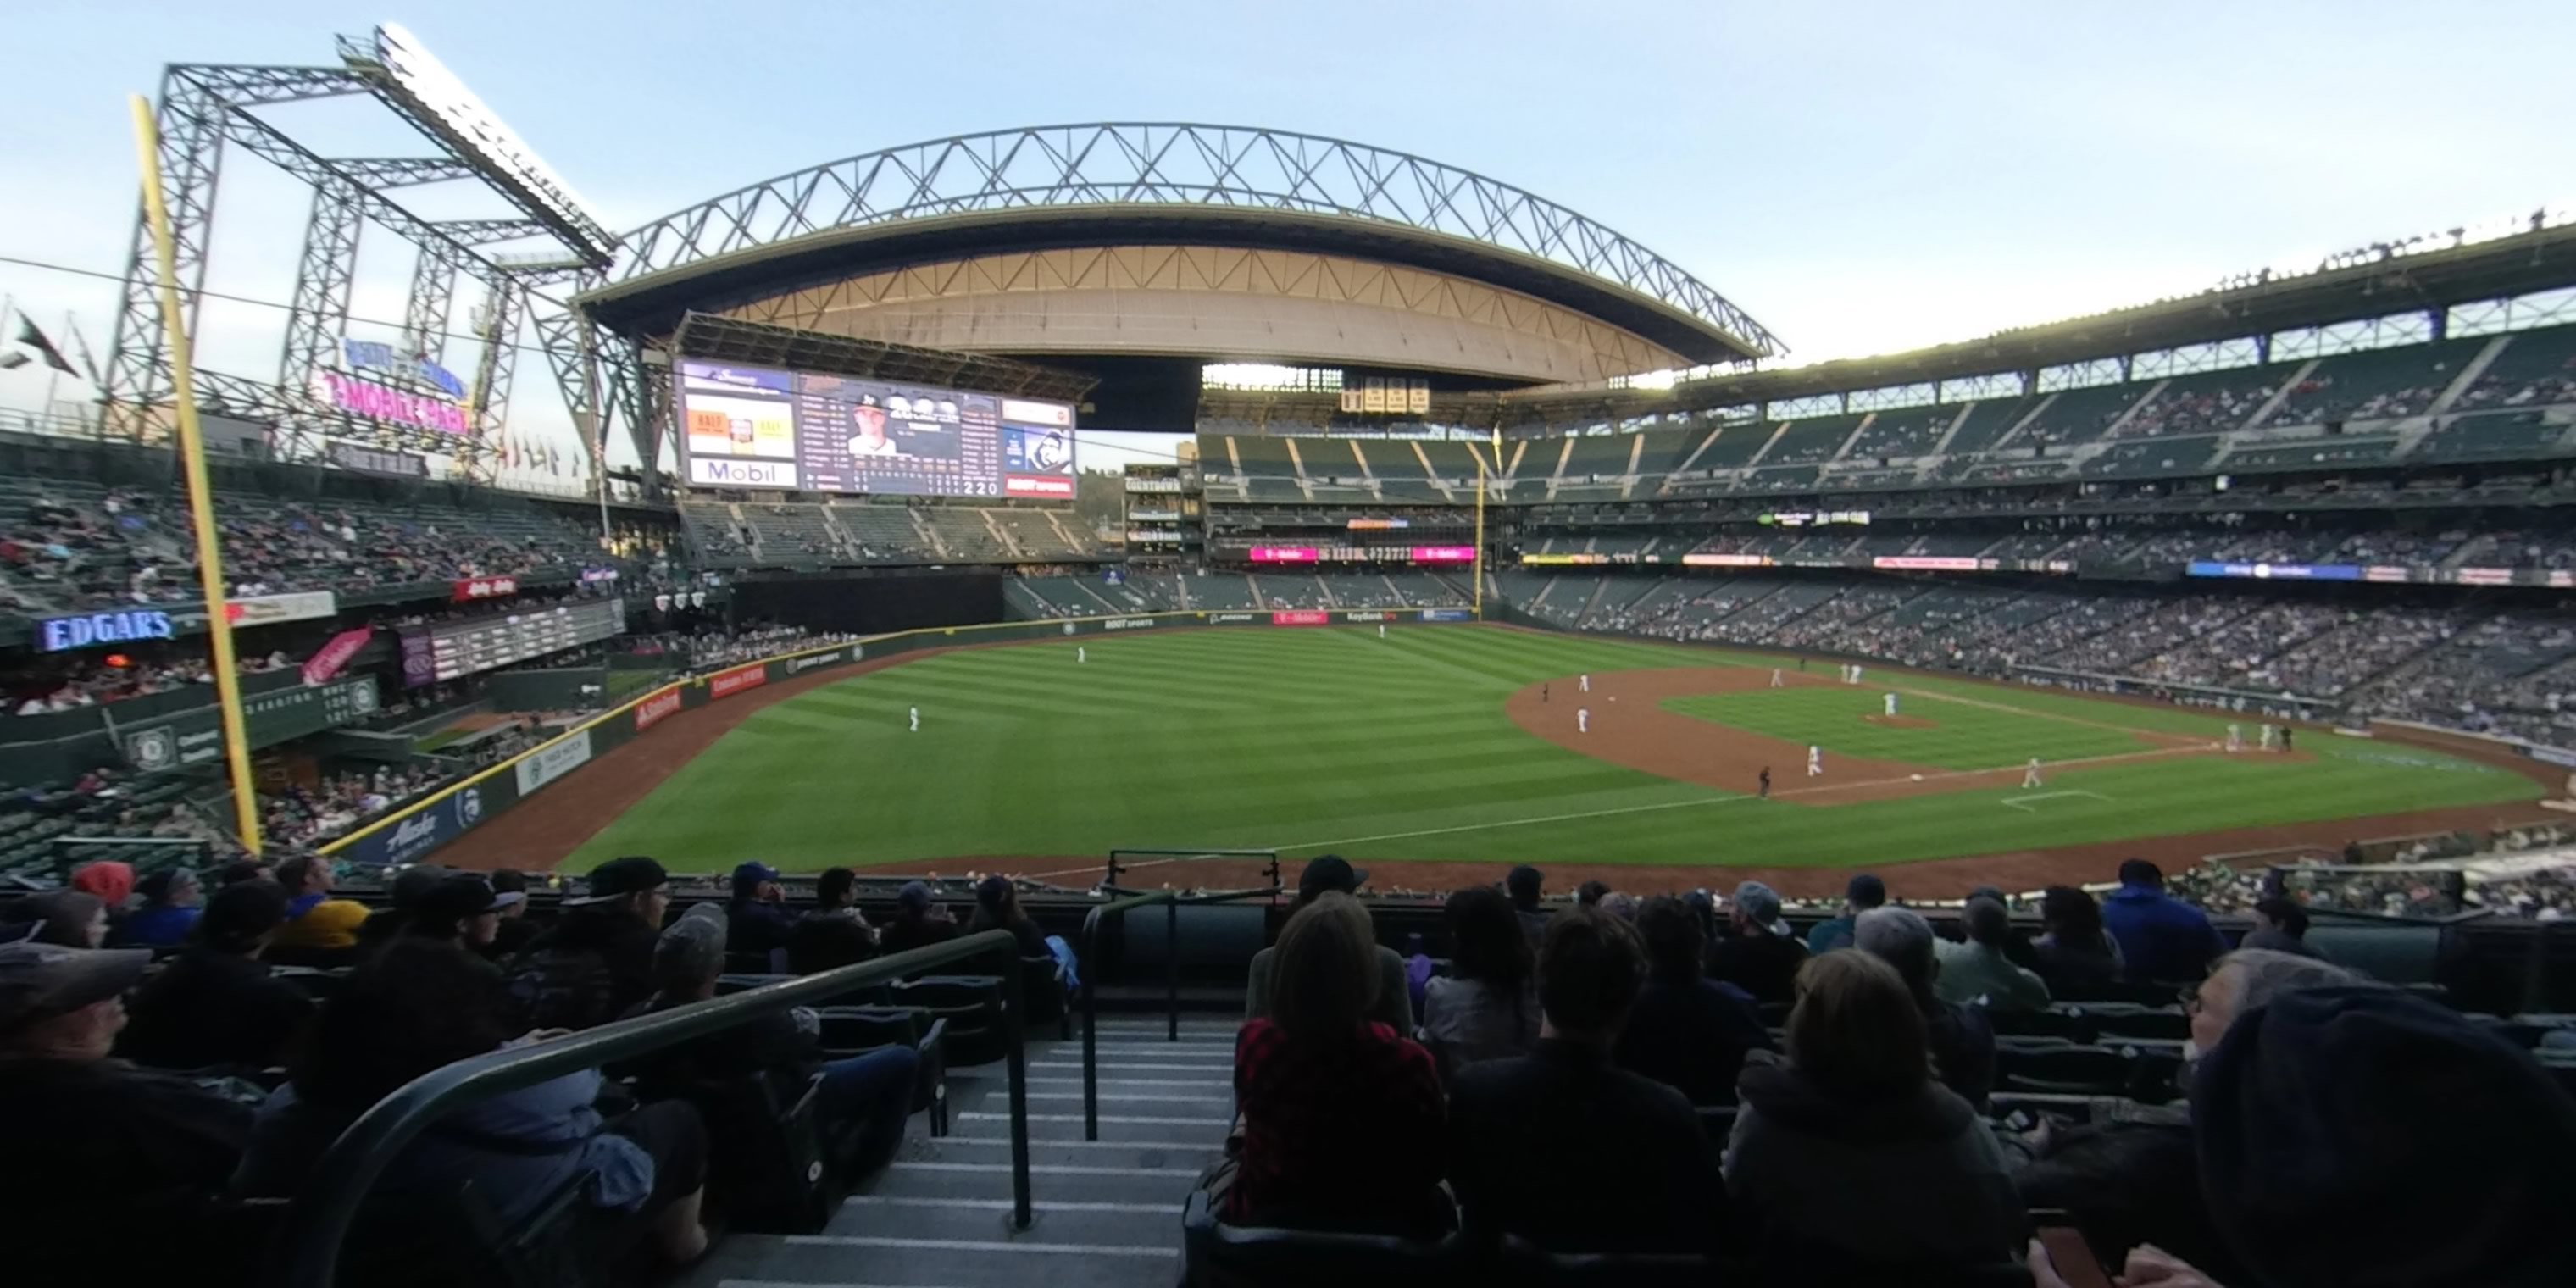 section 244 panoramic seat view  for baseball - t-mobile park